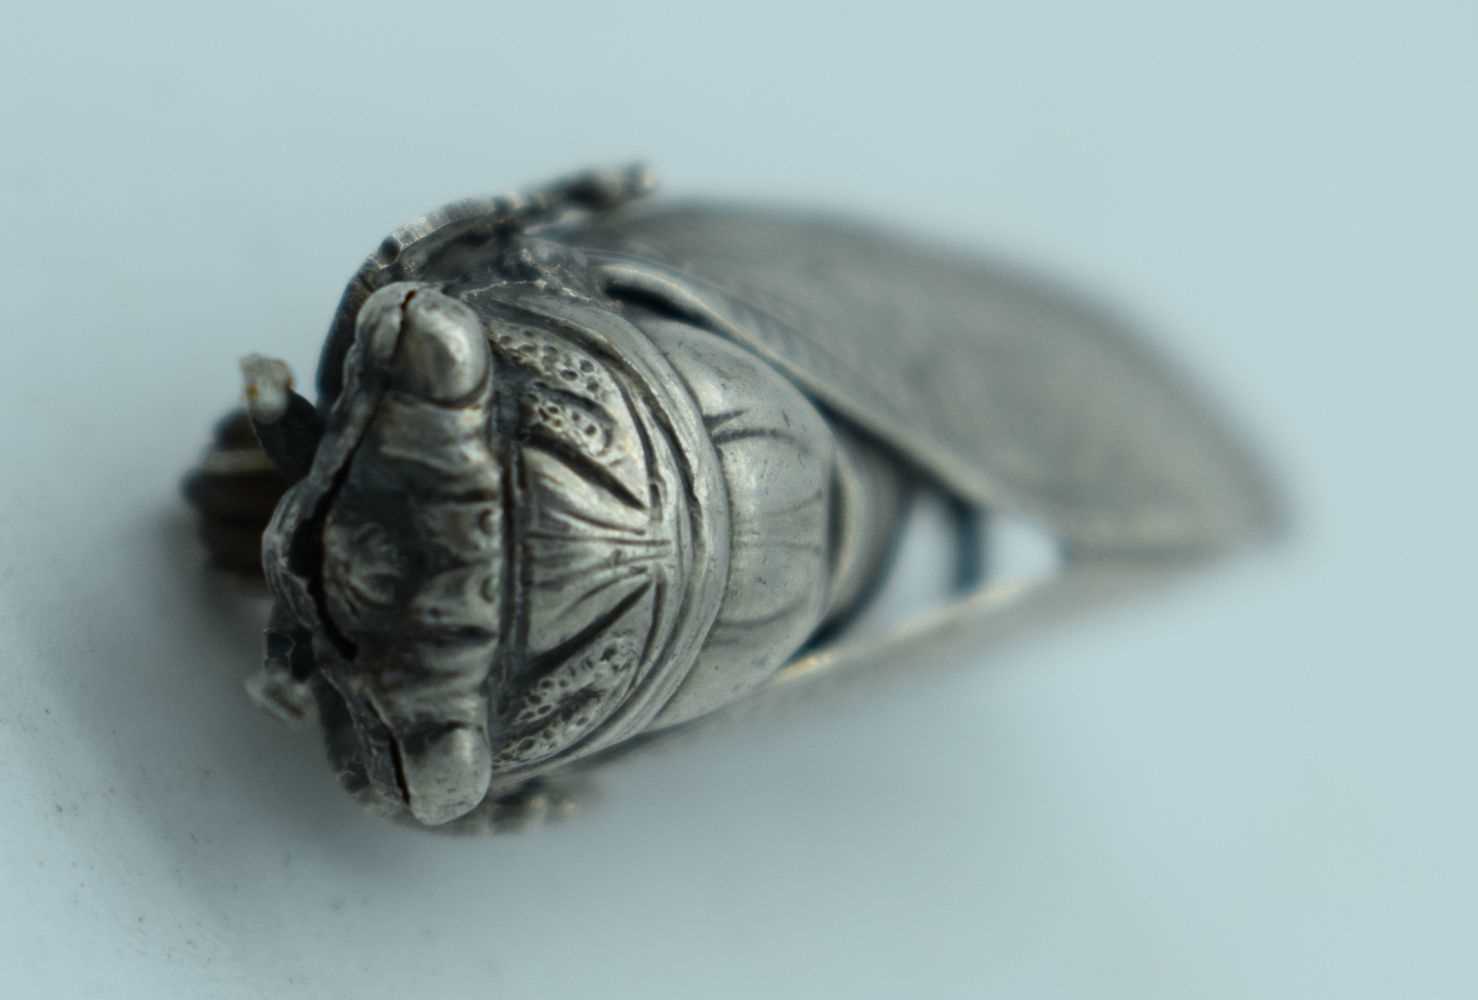 AN EARLY 20TH CENTURY JAPANESE MEIJI PERIOD SILVER LOCUST BROOCH. 6.5 grams. 4.75 cm x 1.5 cm. - Image 3 of 3